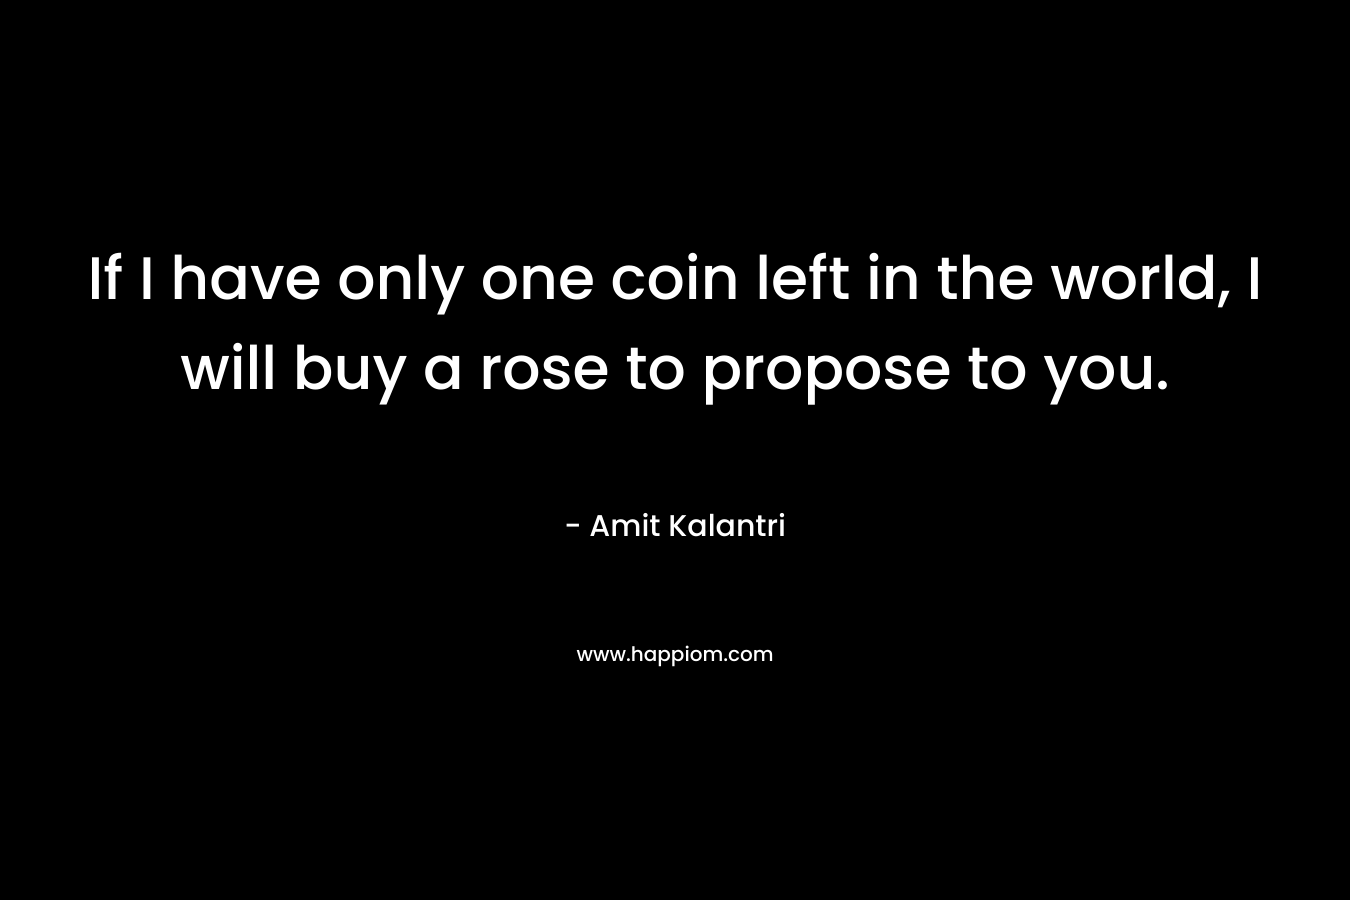 If I have only one coin left in the world, I will buy a rose to propose to you.